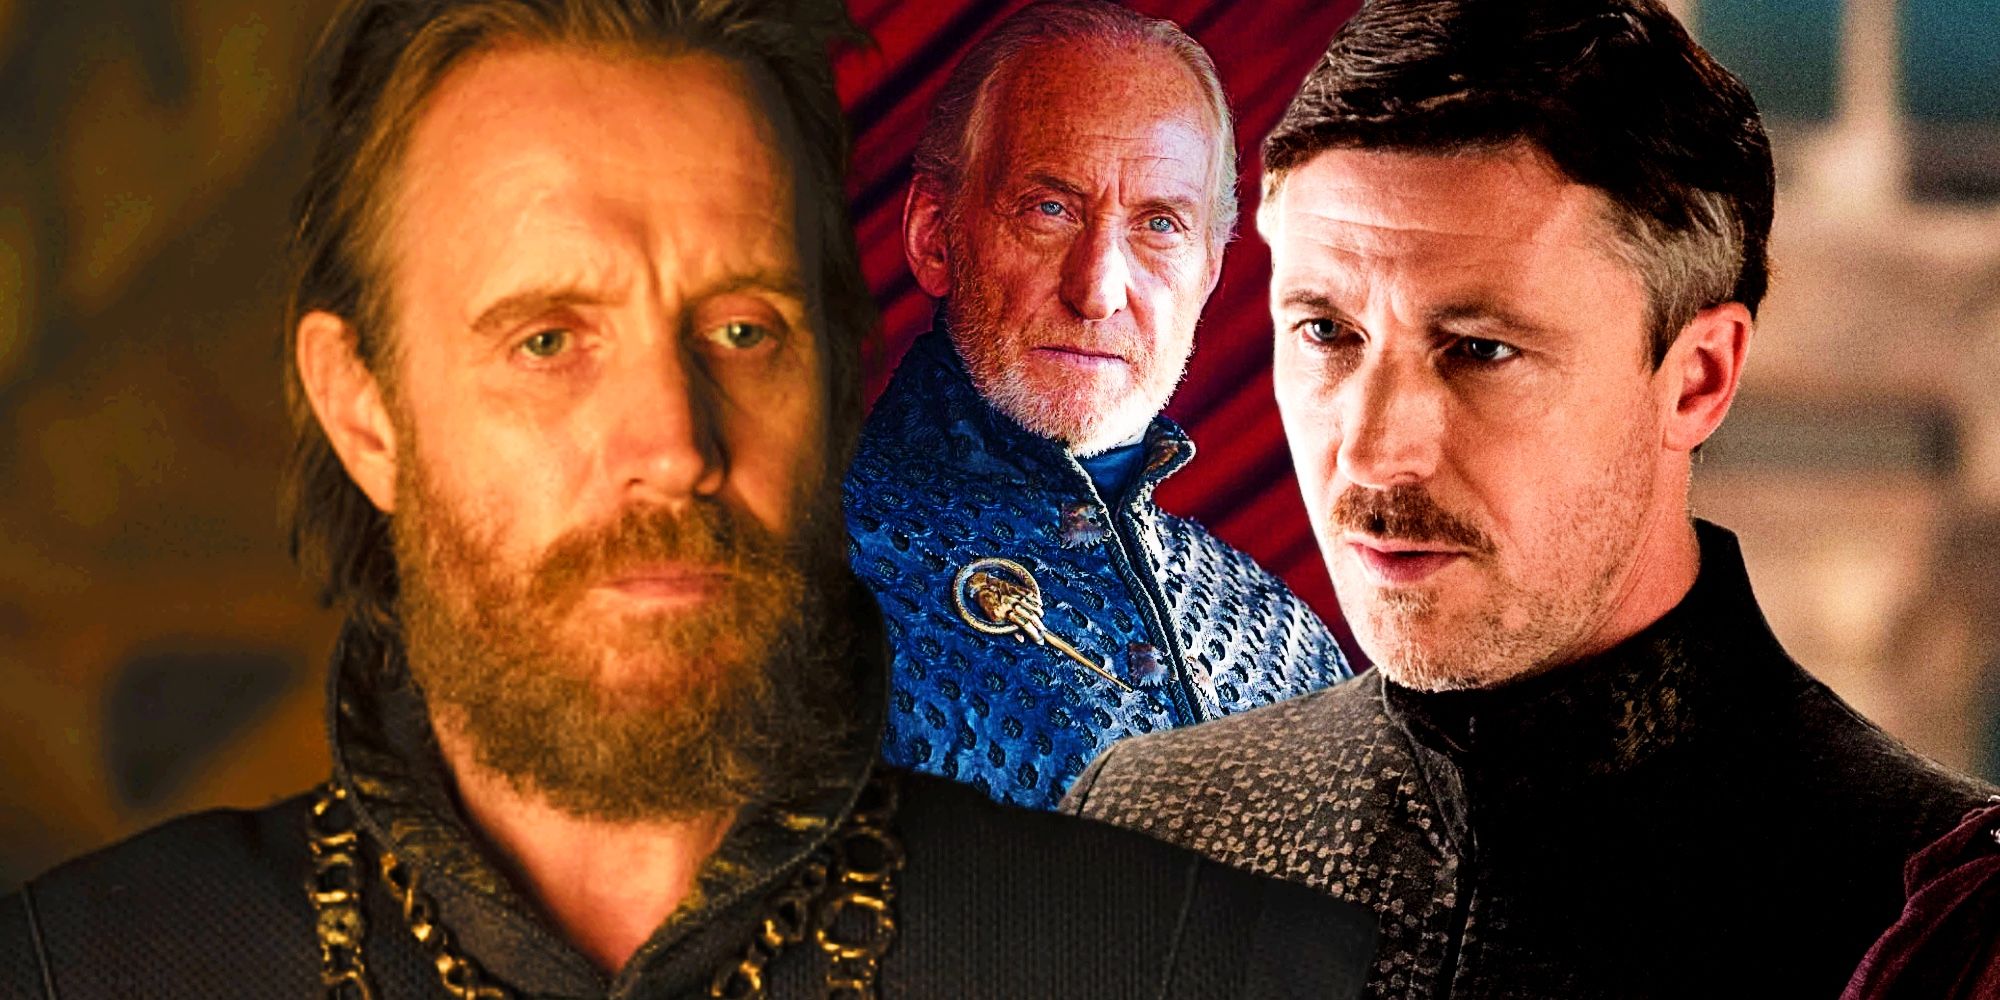 House Of The Dragon's Otto Hightower and Game Of Thrones' Littlefinger & Tywin Lannister